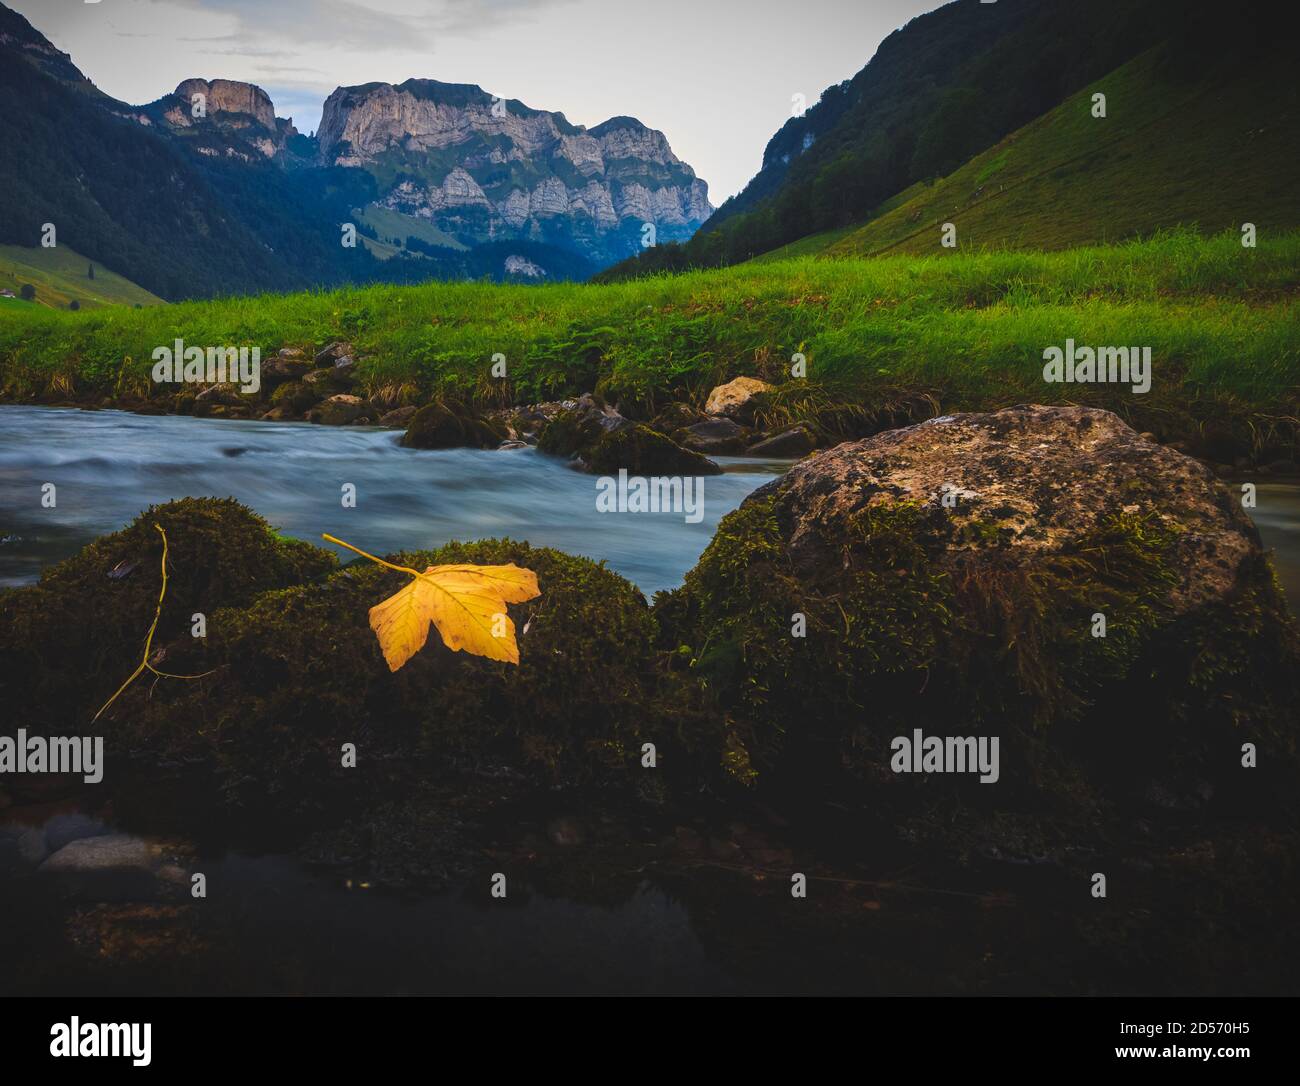 yellow maple leaf on a stone in the river, Appenzell, Alps Stock Photo